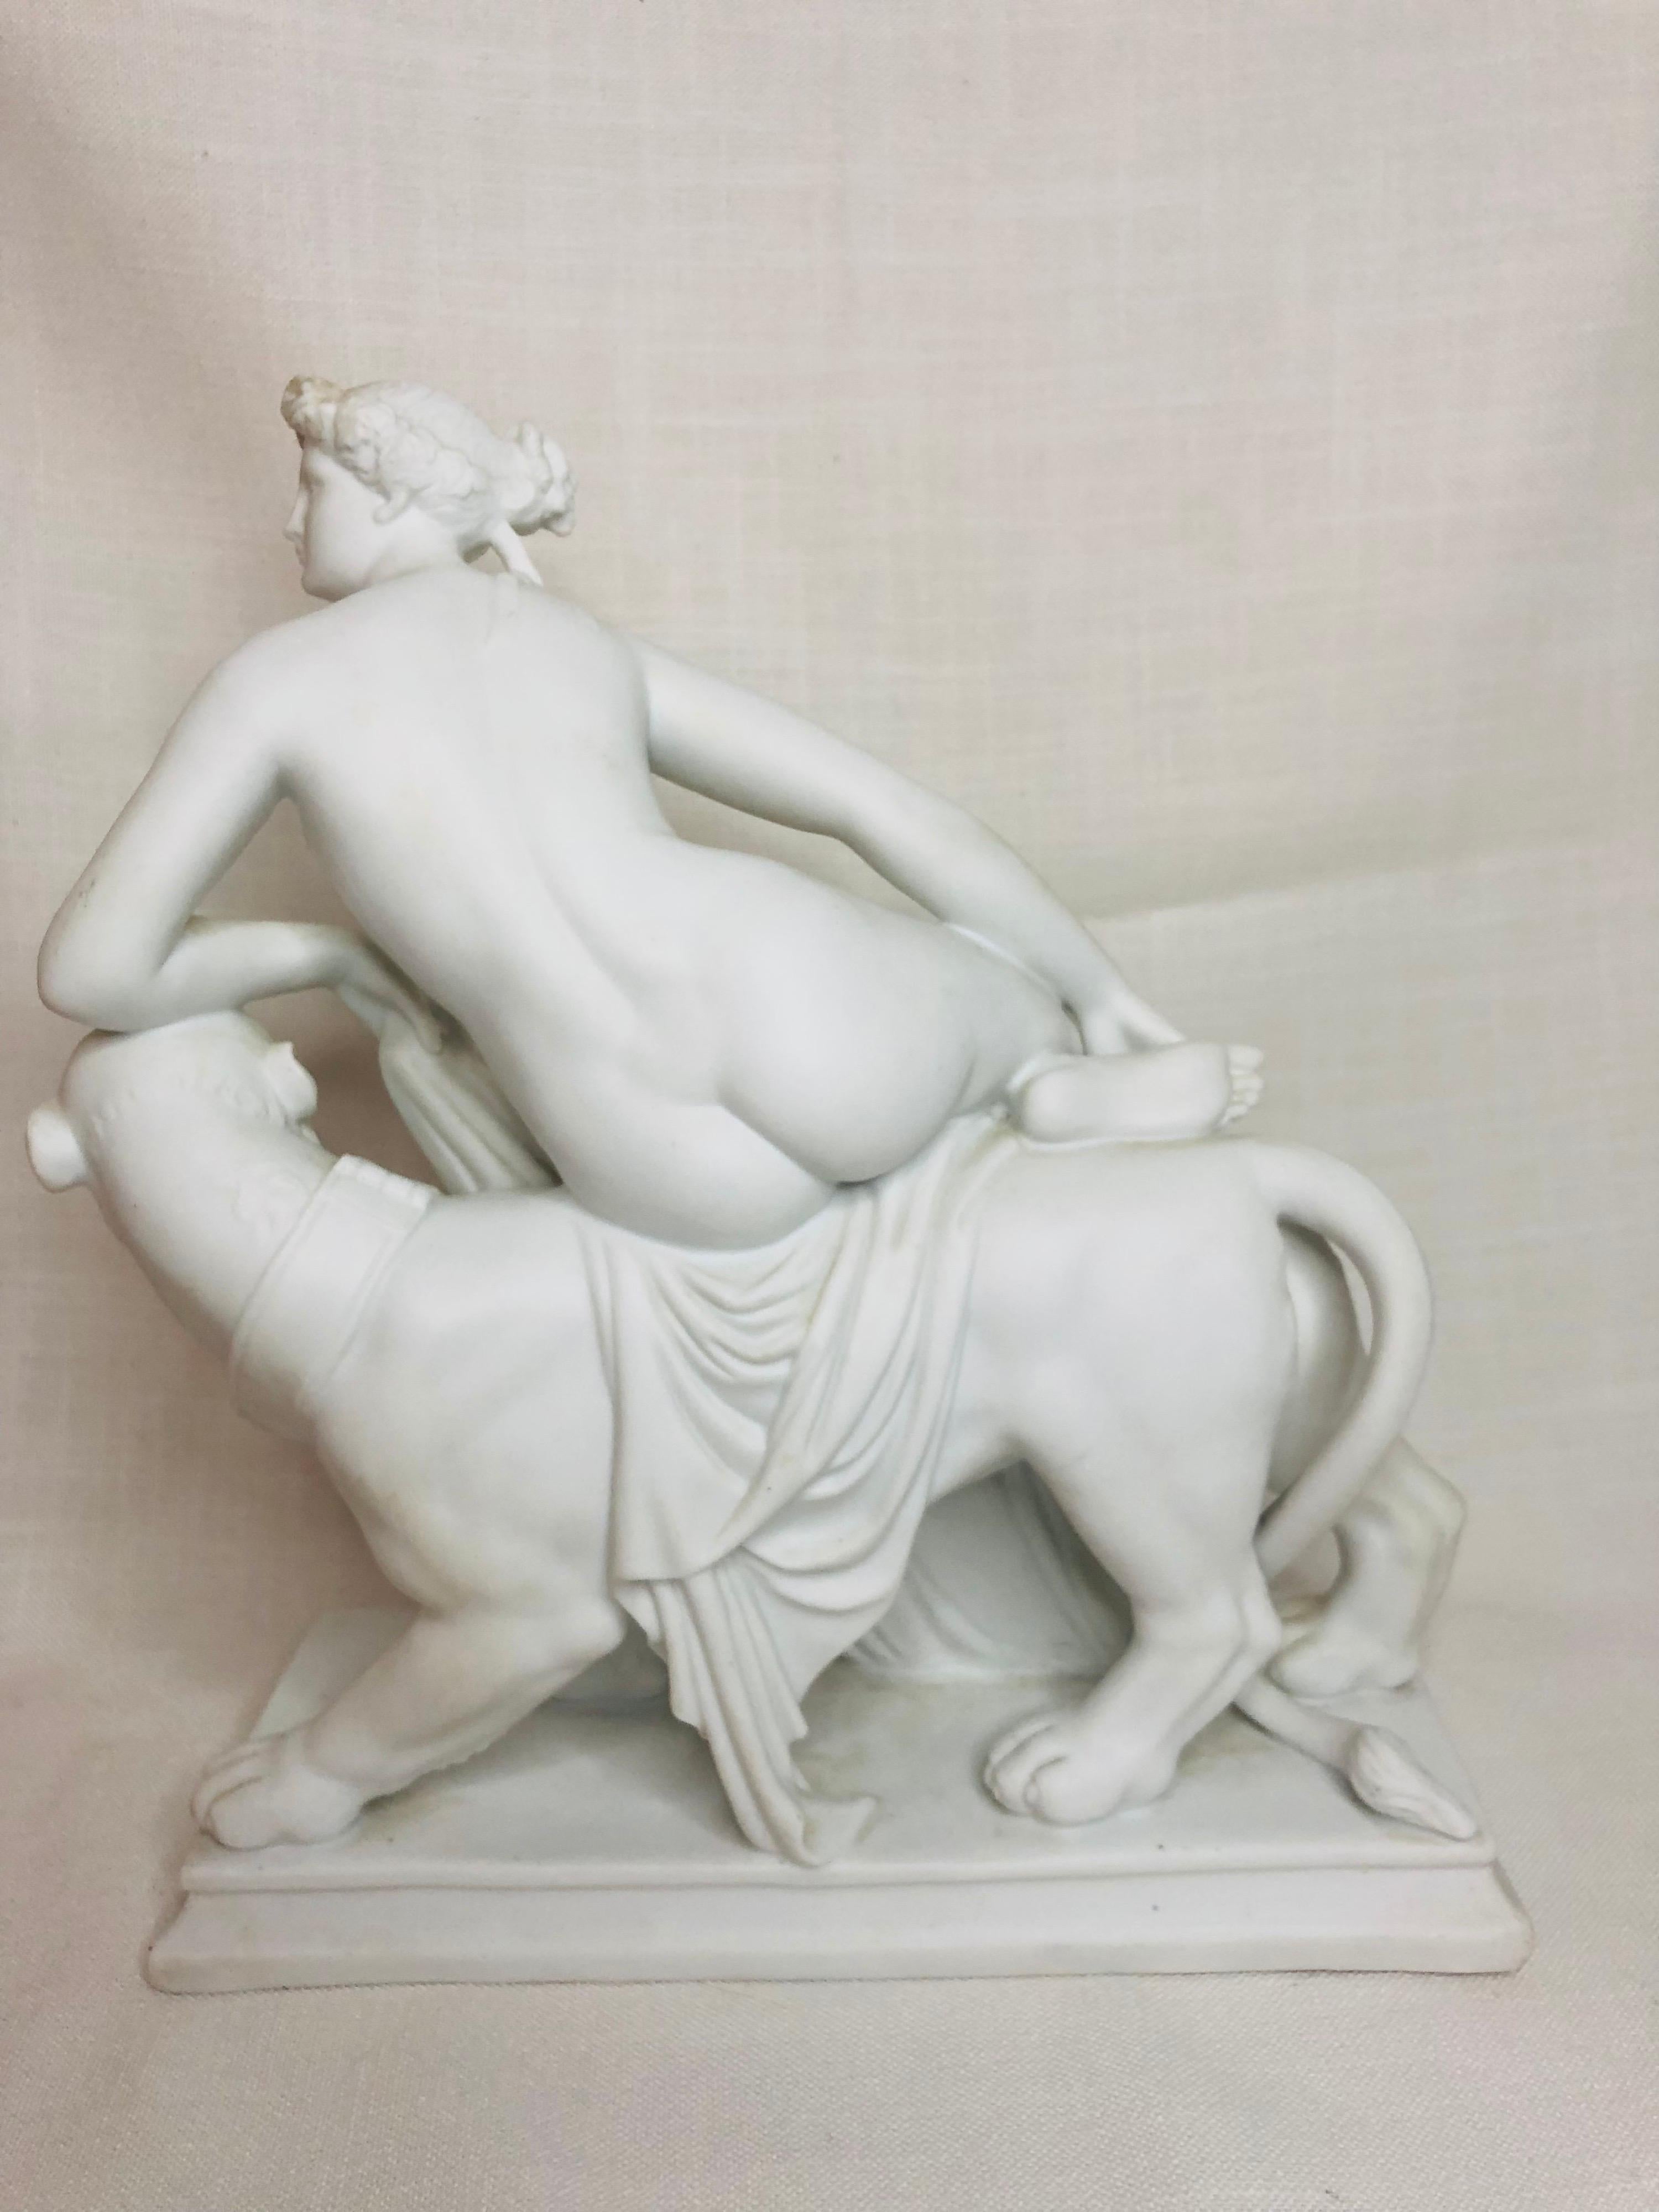 19th Century English Parian Figurine of a Nude Figure of Adriadne Riding on Top of a Panther